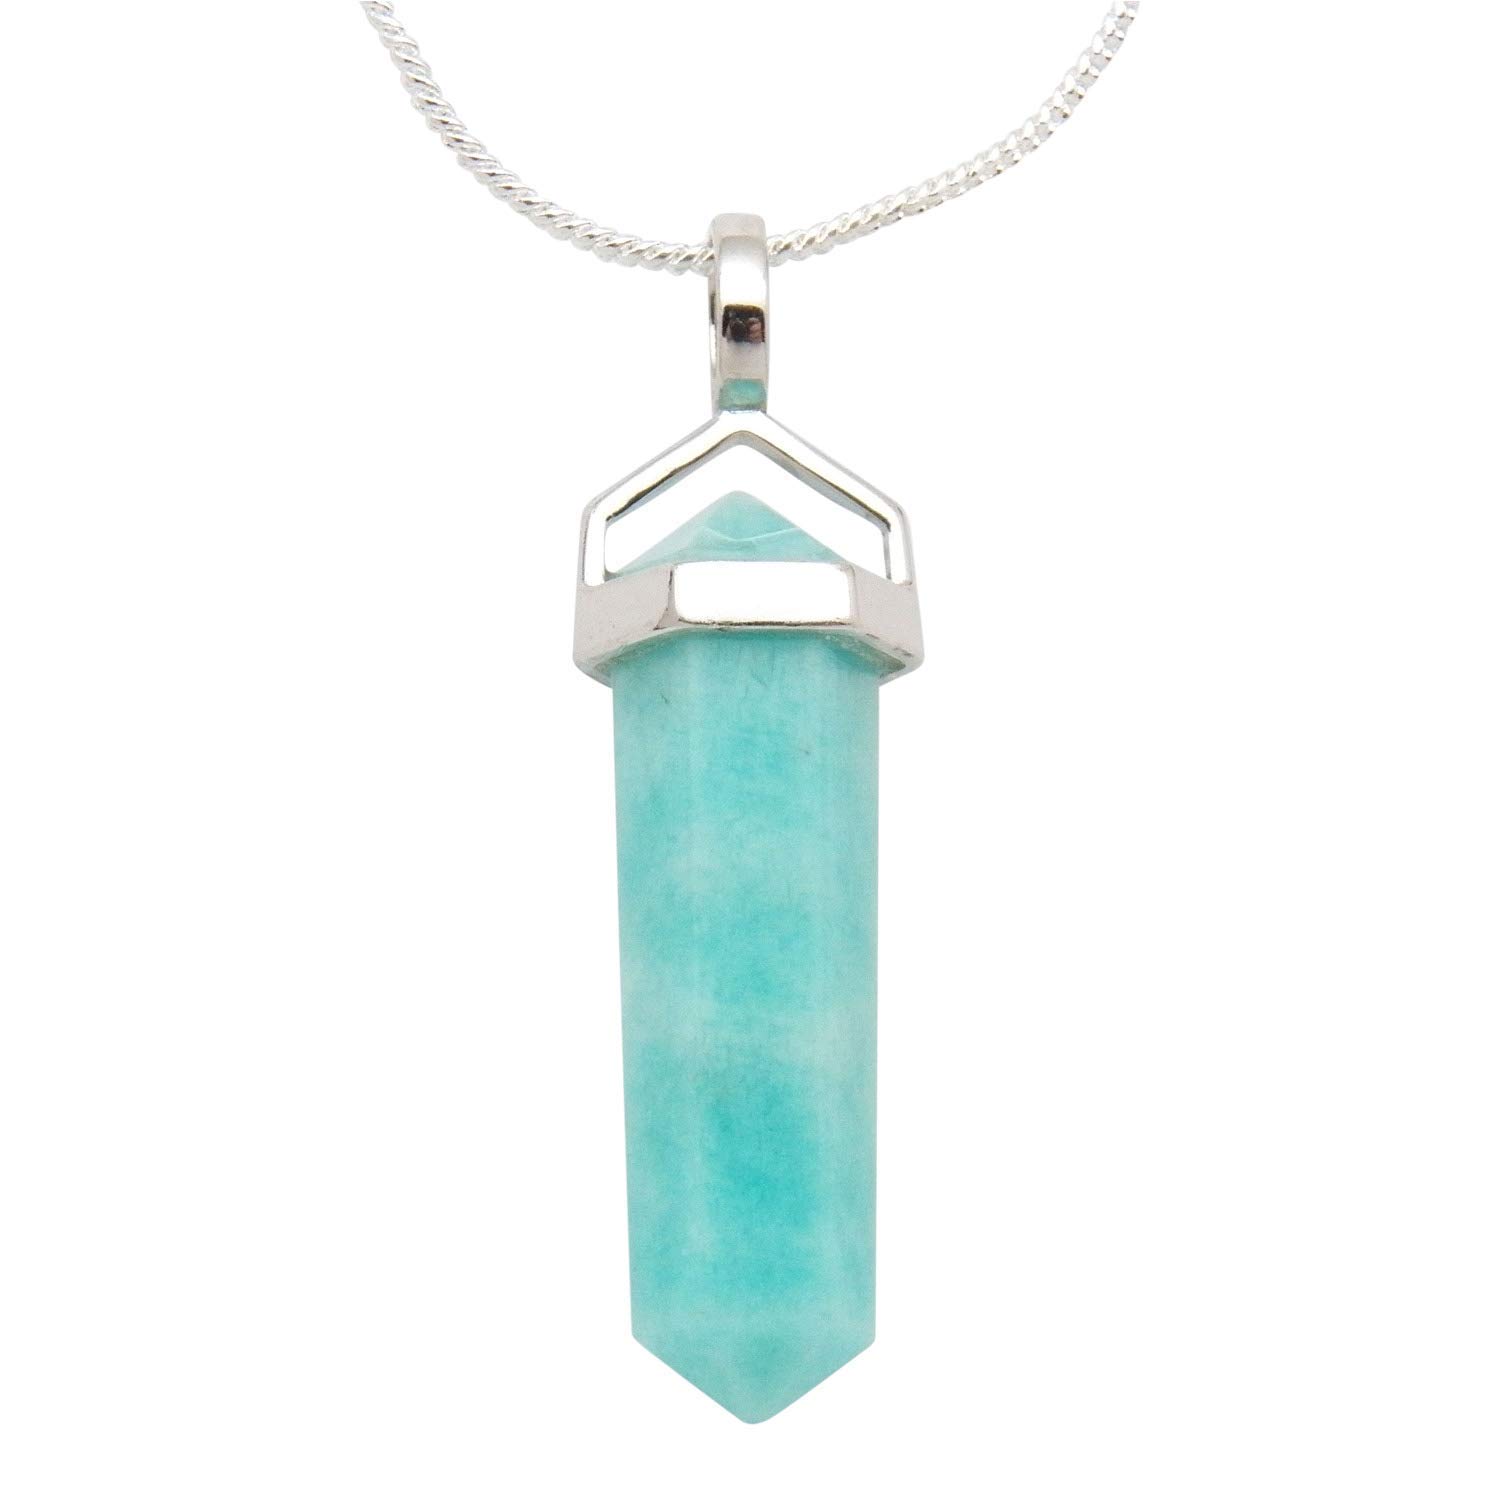 Amazonite crystal point pendant with a sterling silver bail